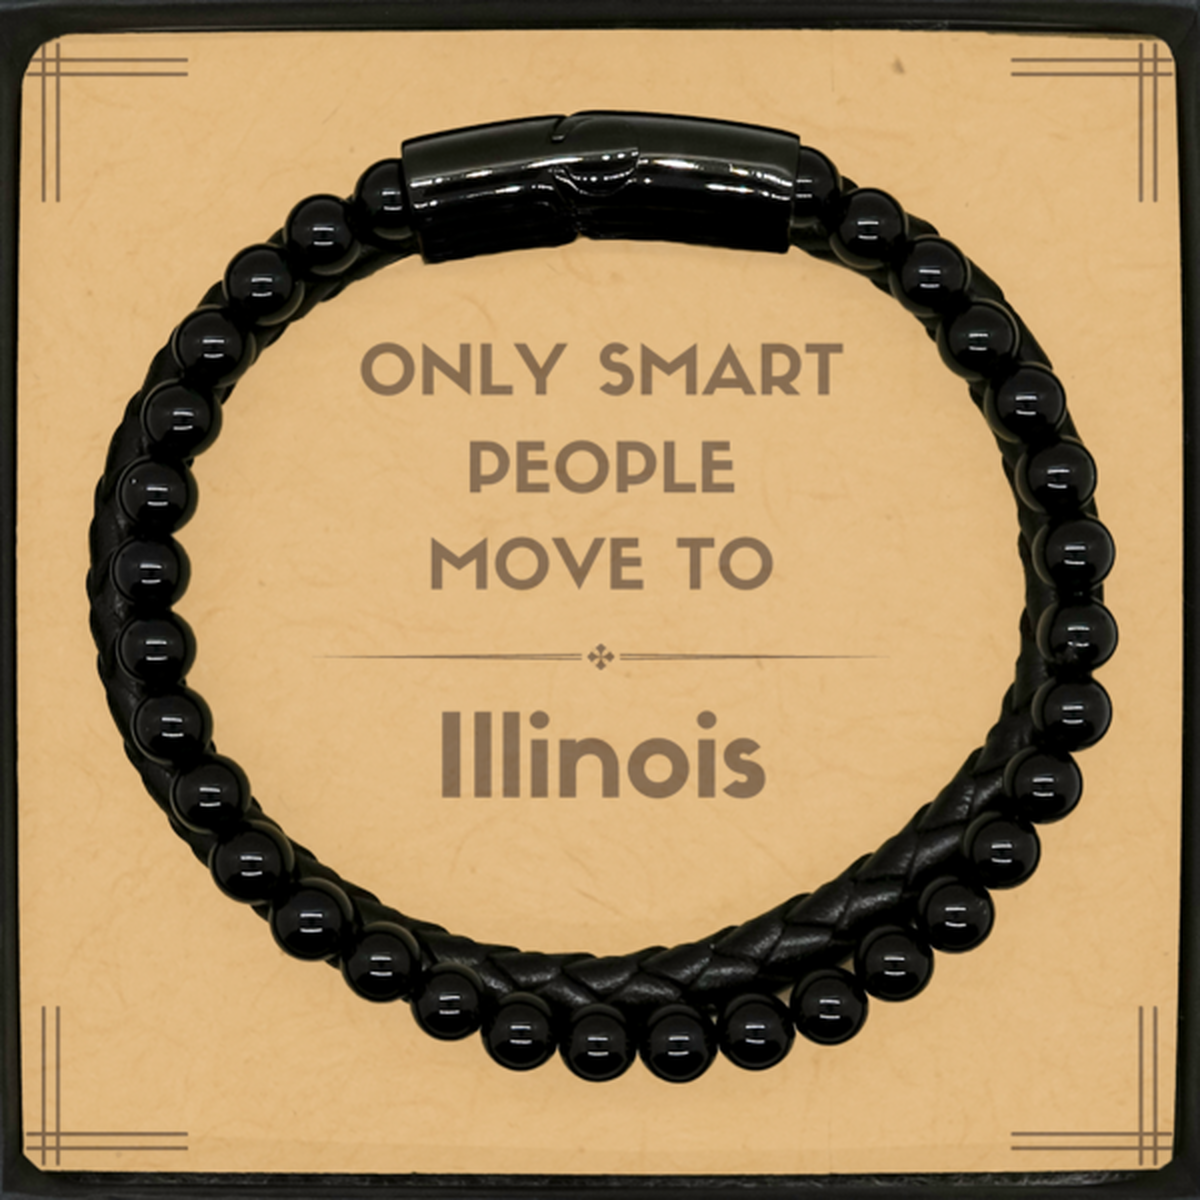 Only smart people move to Illinois Stone Leather Bracelets, Message Card Gifts For Illinois, Move to Illinois Gifts for Friends Coworker Funny Saying Quote